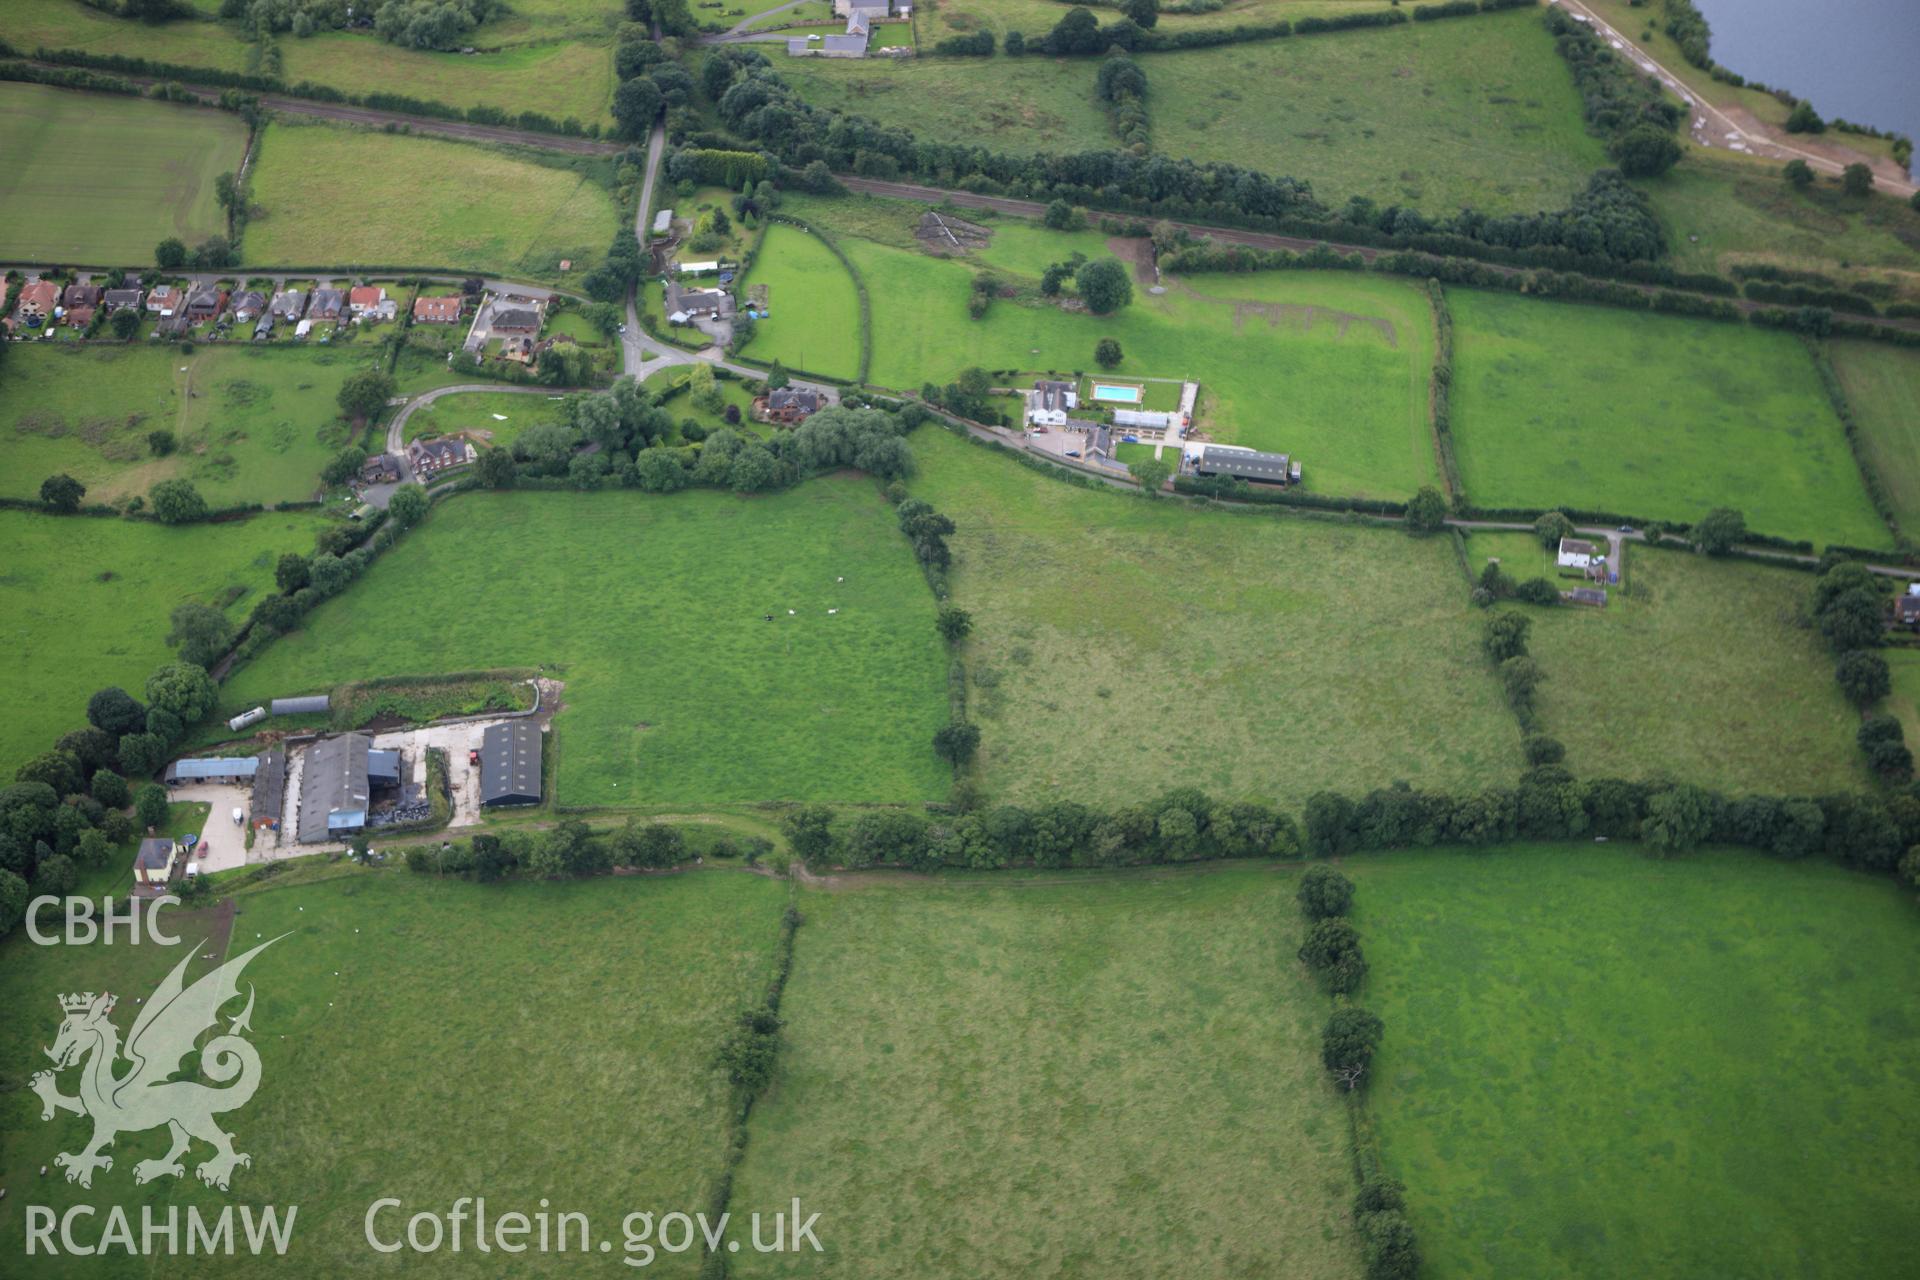 RCAHMW colour oblique aerial photograph of two sections of Wat's Dyke between Clawdd Offa and Pigeon House Farm. Taken on 30 July 2009 by Toby Driver